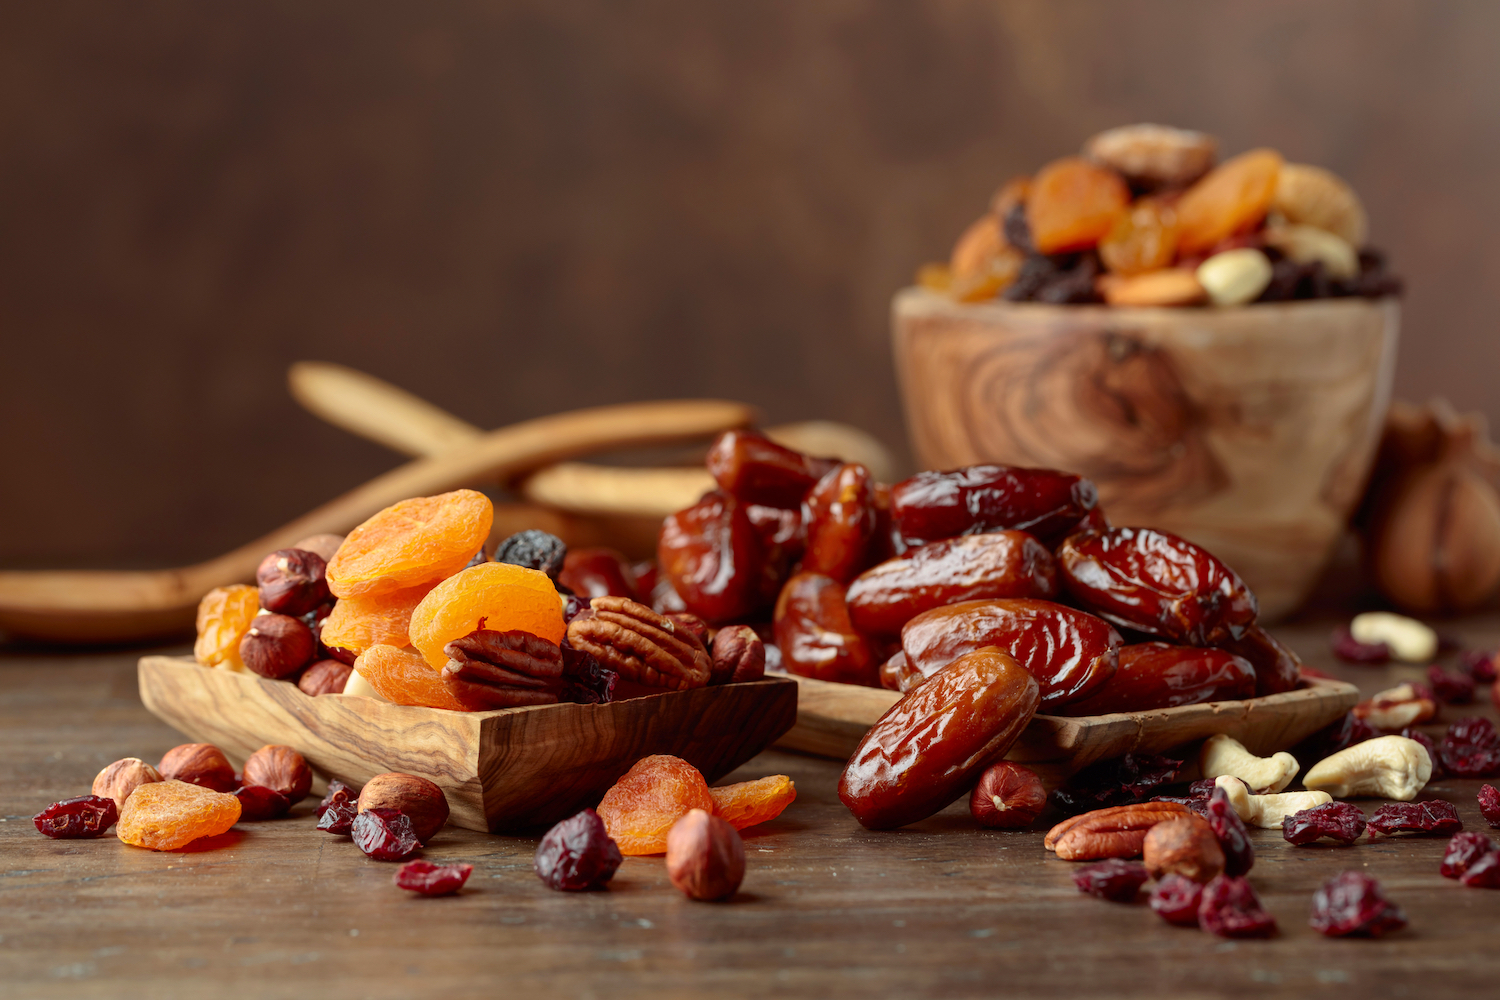 A Variety of dried fruit and nuts